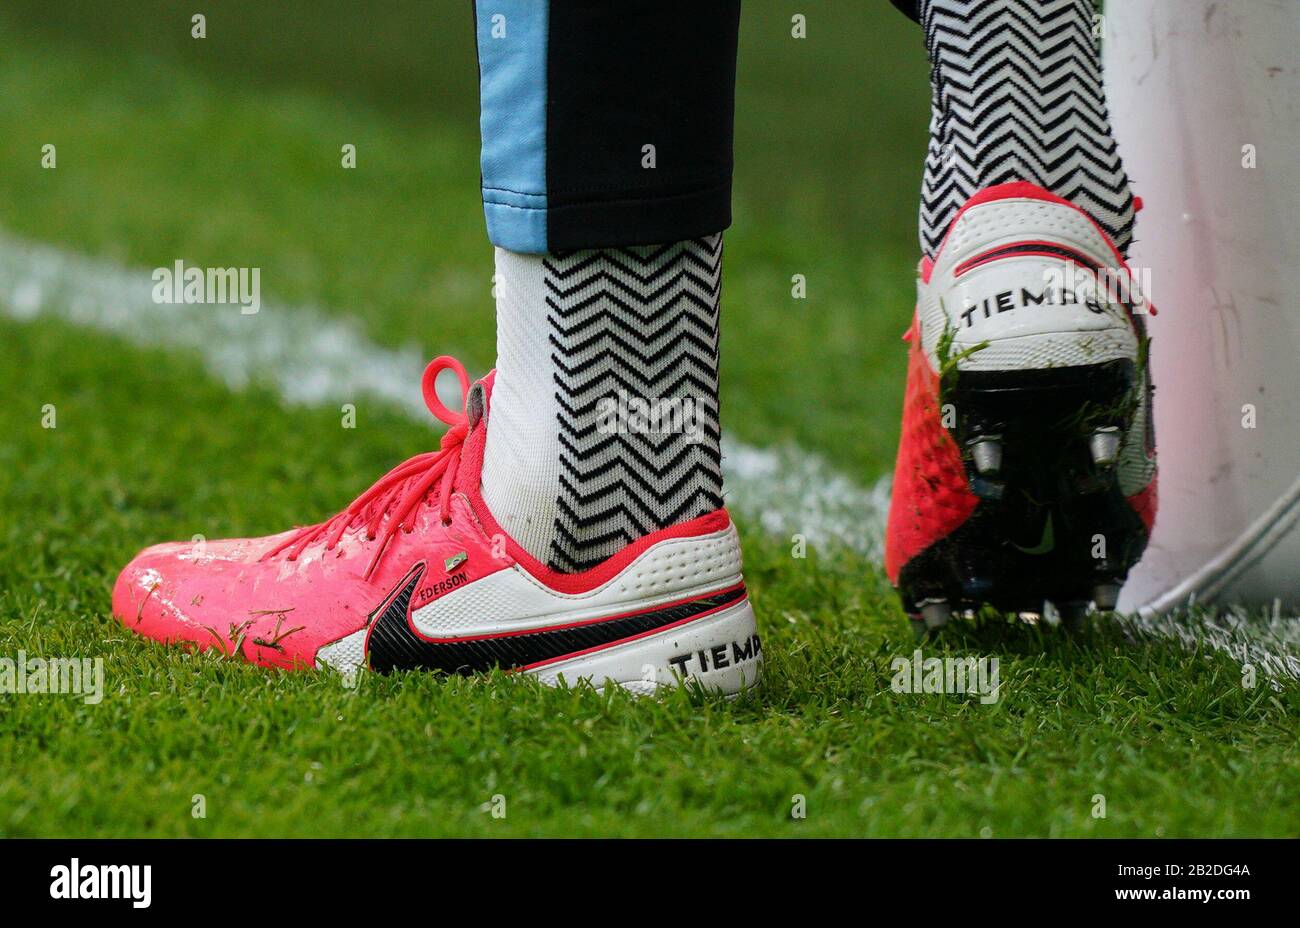 Birmingham, UK. 01st Mar, 2020. The nike Tiempo football boots of  Goalkeeper Ederson of Man City during the Carabao Cup Final match between  Aston Villa and Manchester City at Wembley Stadium, London,